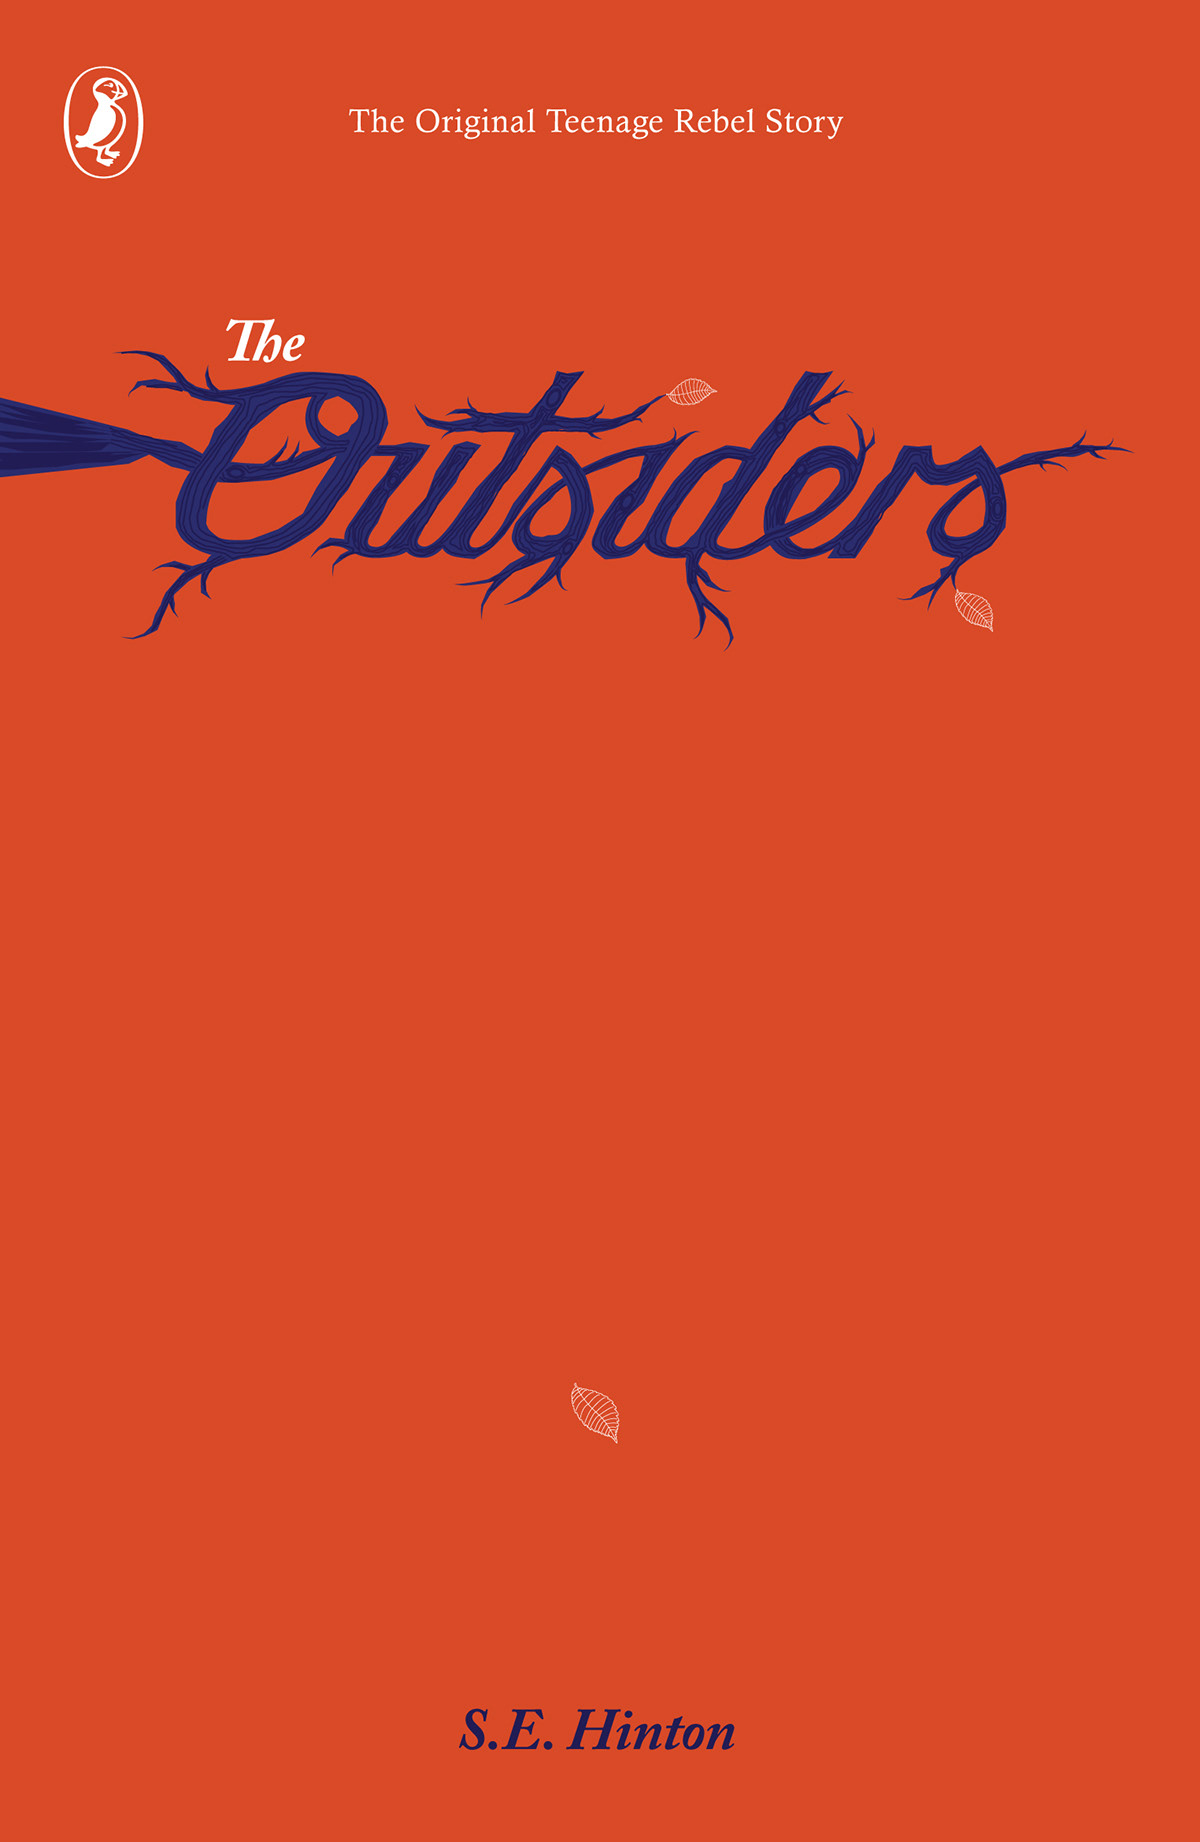 Book Cover Design Puffin Design Award puffin The Outsiders penguin book cover children's book type illustrated type greaser socs s e hinton